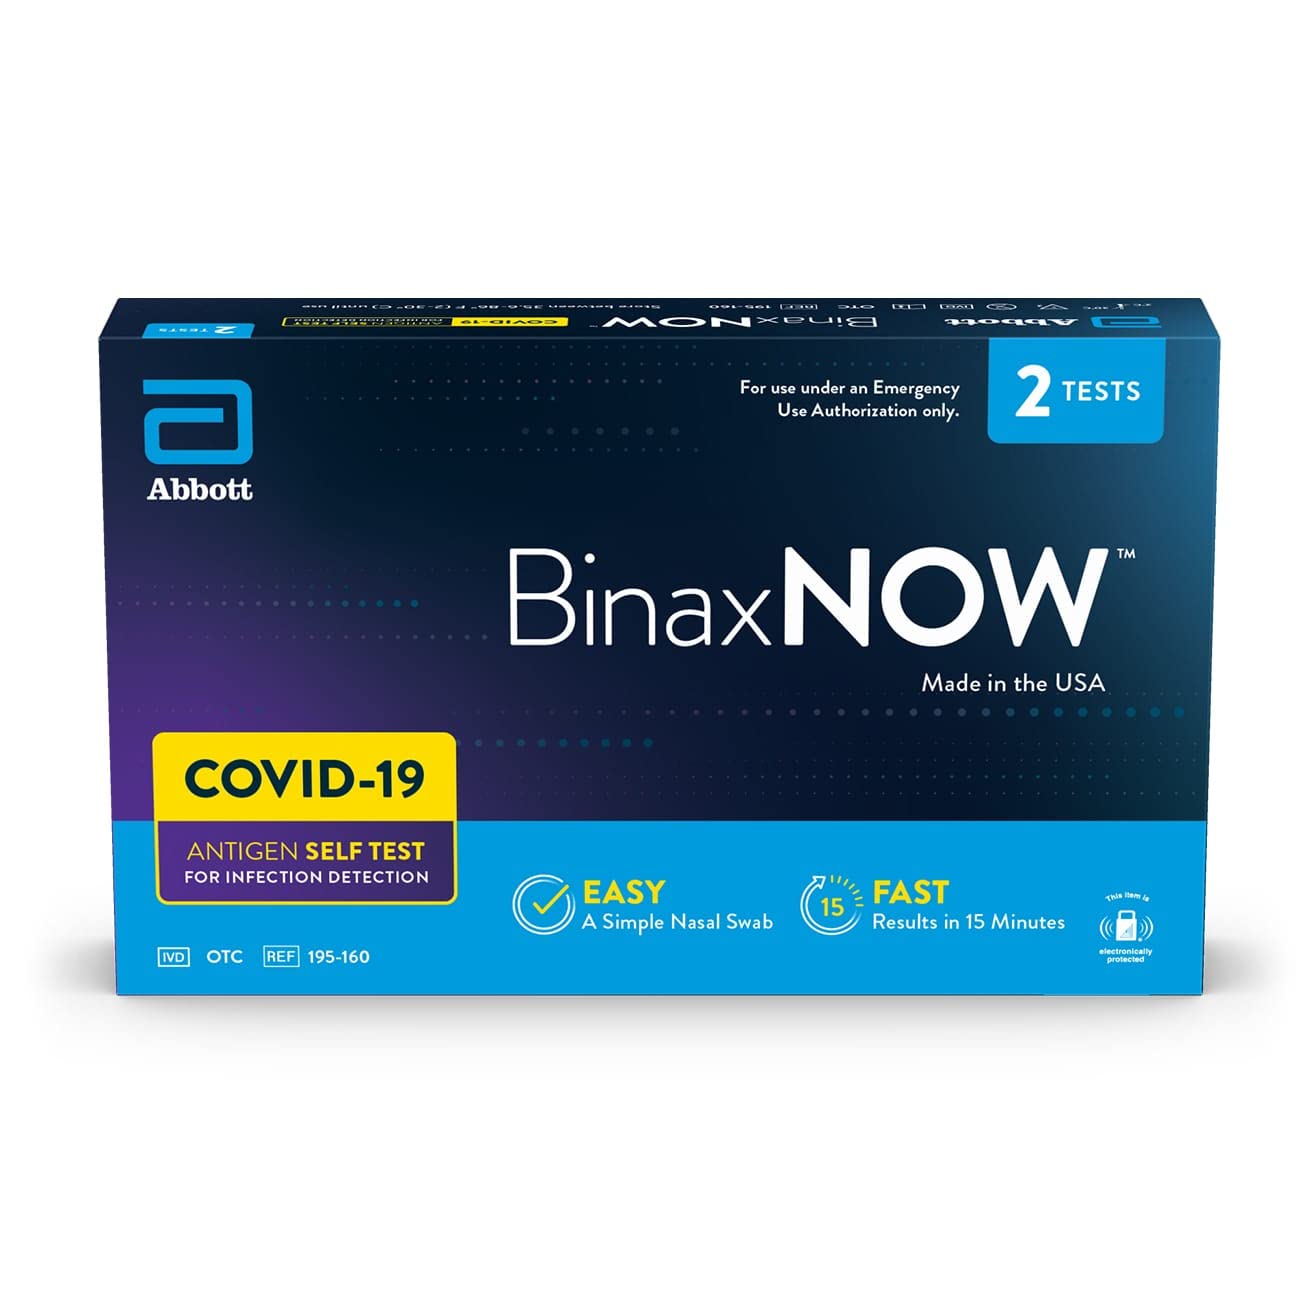 BinaxNOW COVID‐19 Antigen Self Test, 1 Pack, Double, 2-count, At Home COVID-19 Test, 2 Tests - image 1 of 13